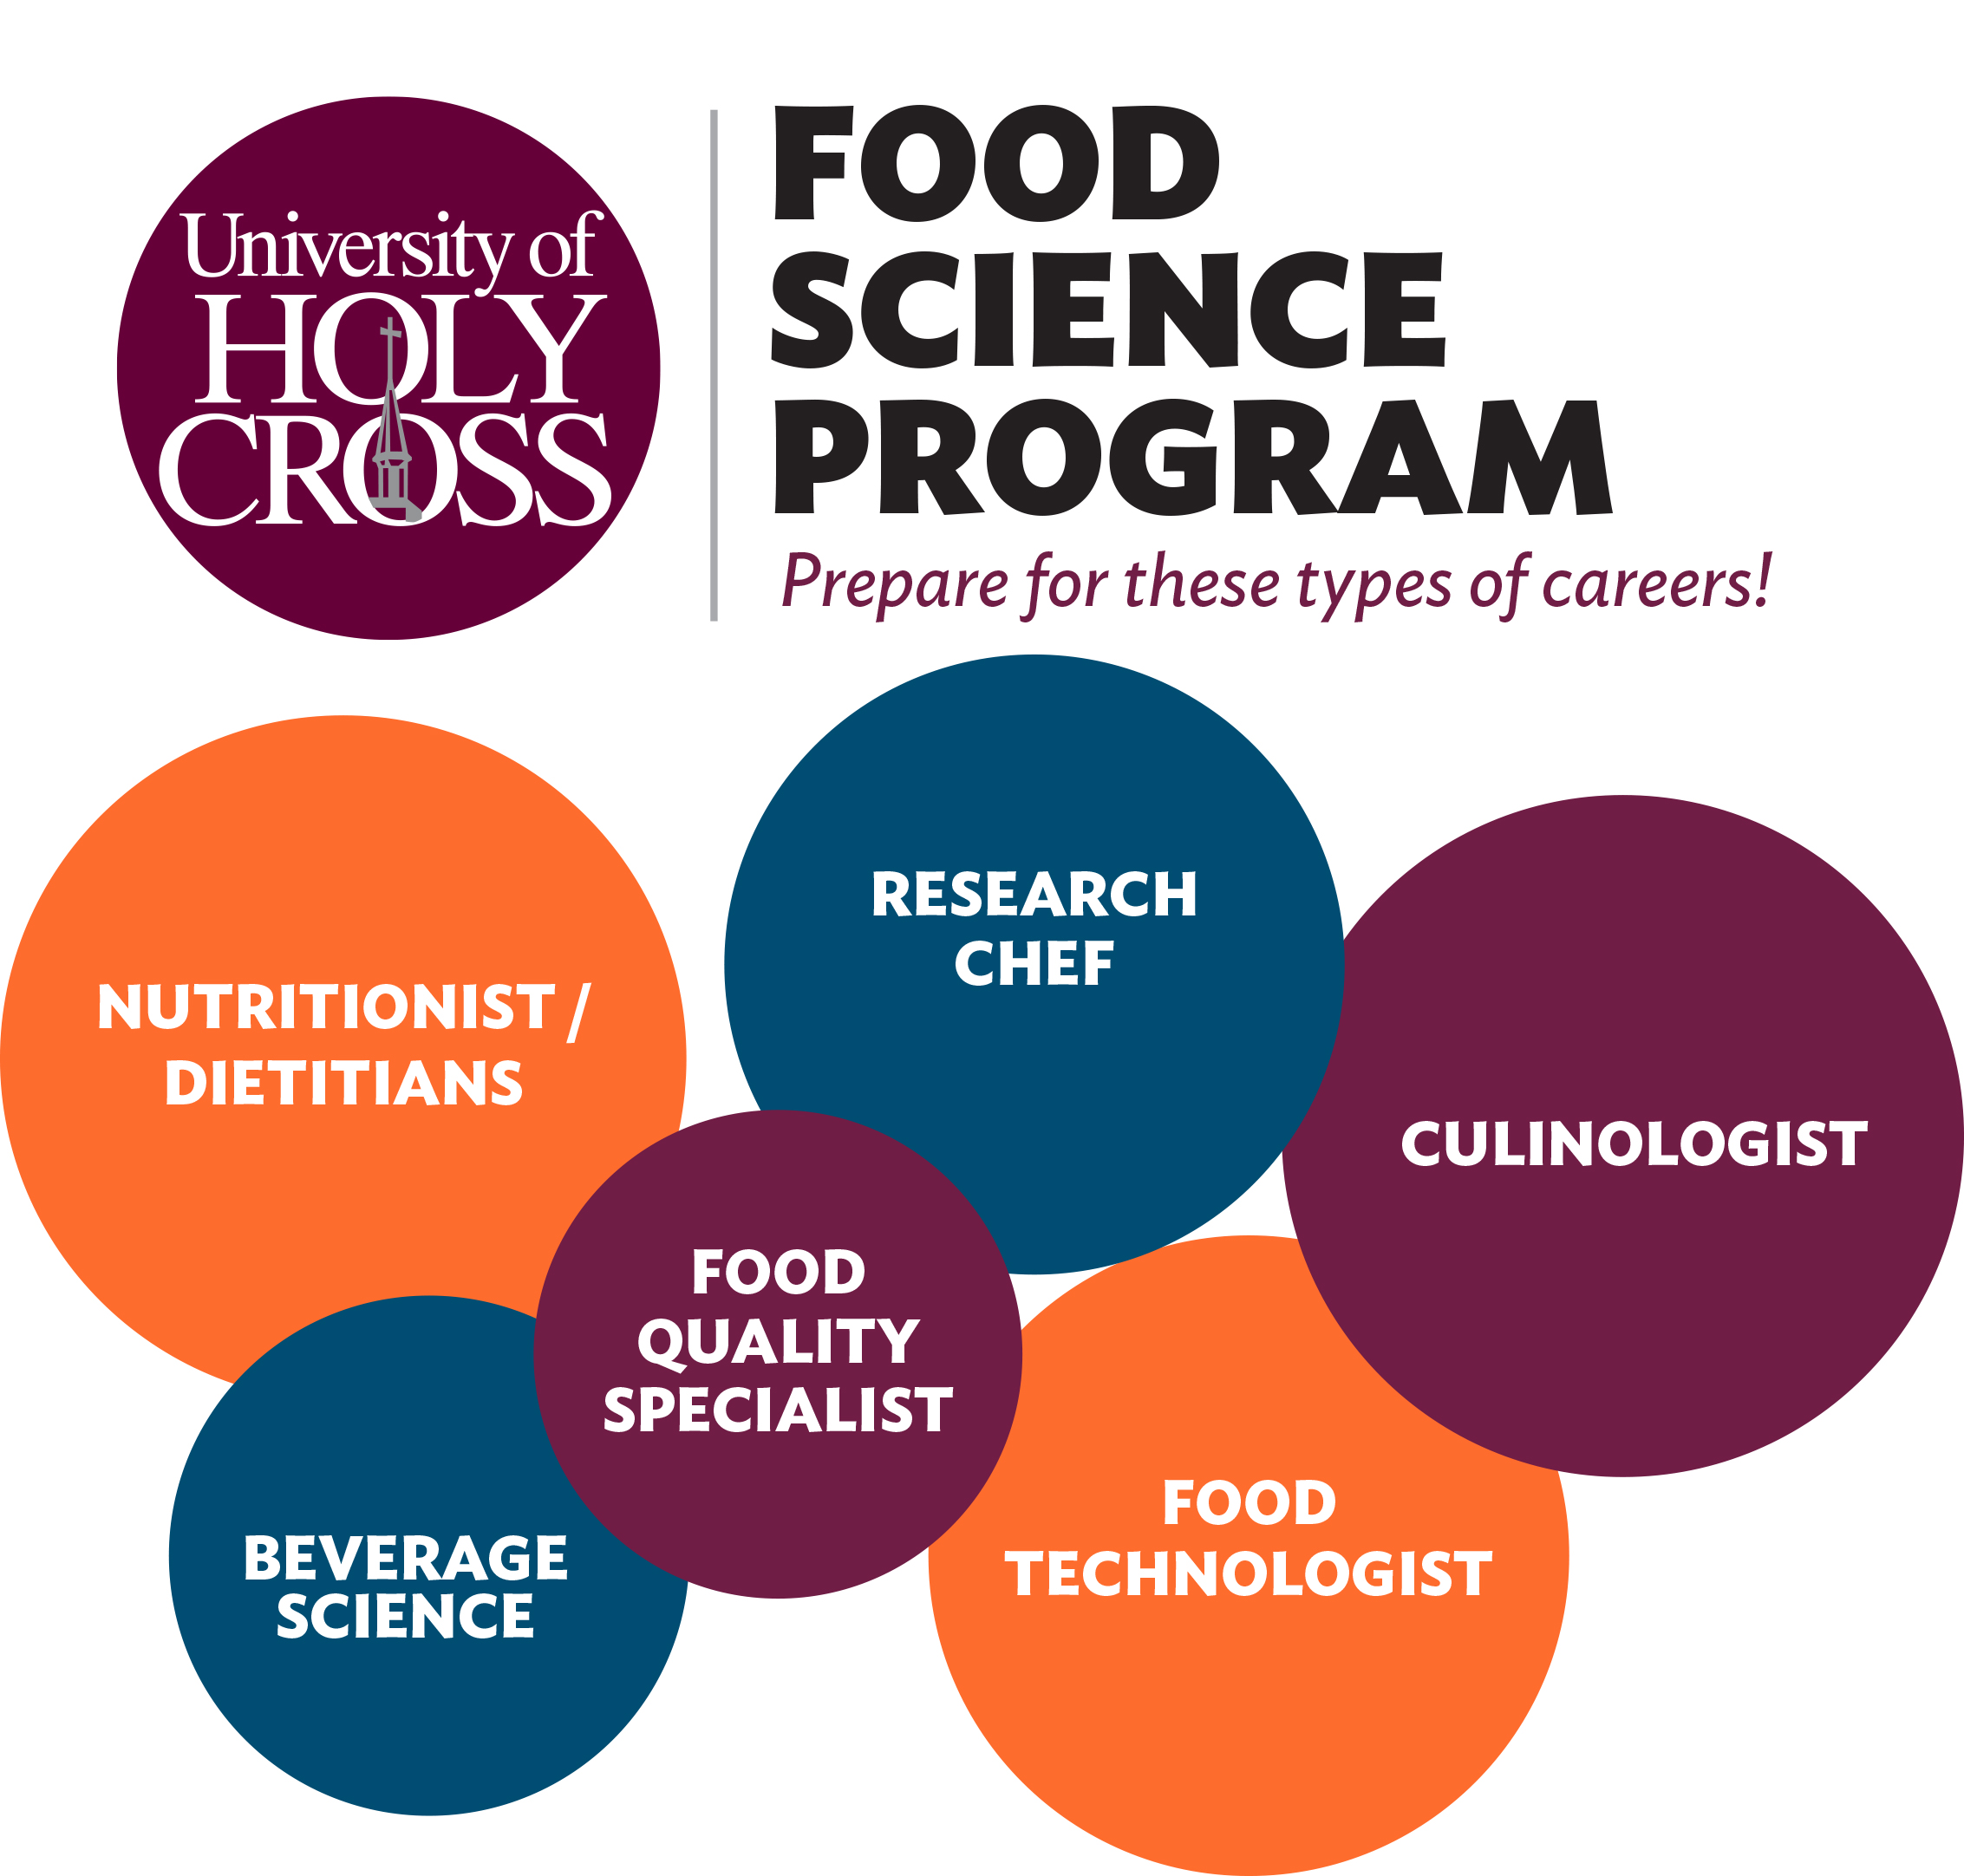 Food Science Program Prepare for these types of careers! Food Quality Specialist, Research Chef, Beverage Science and more.